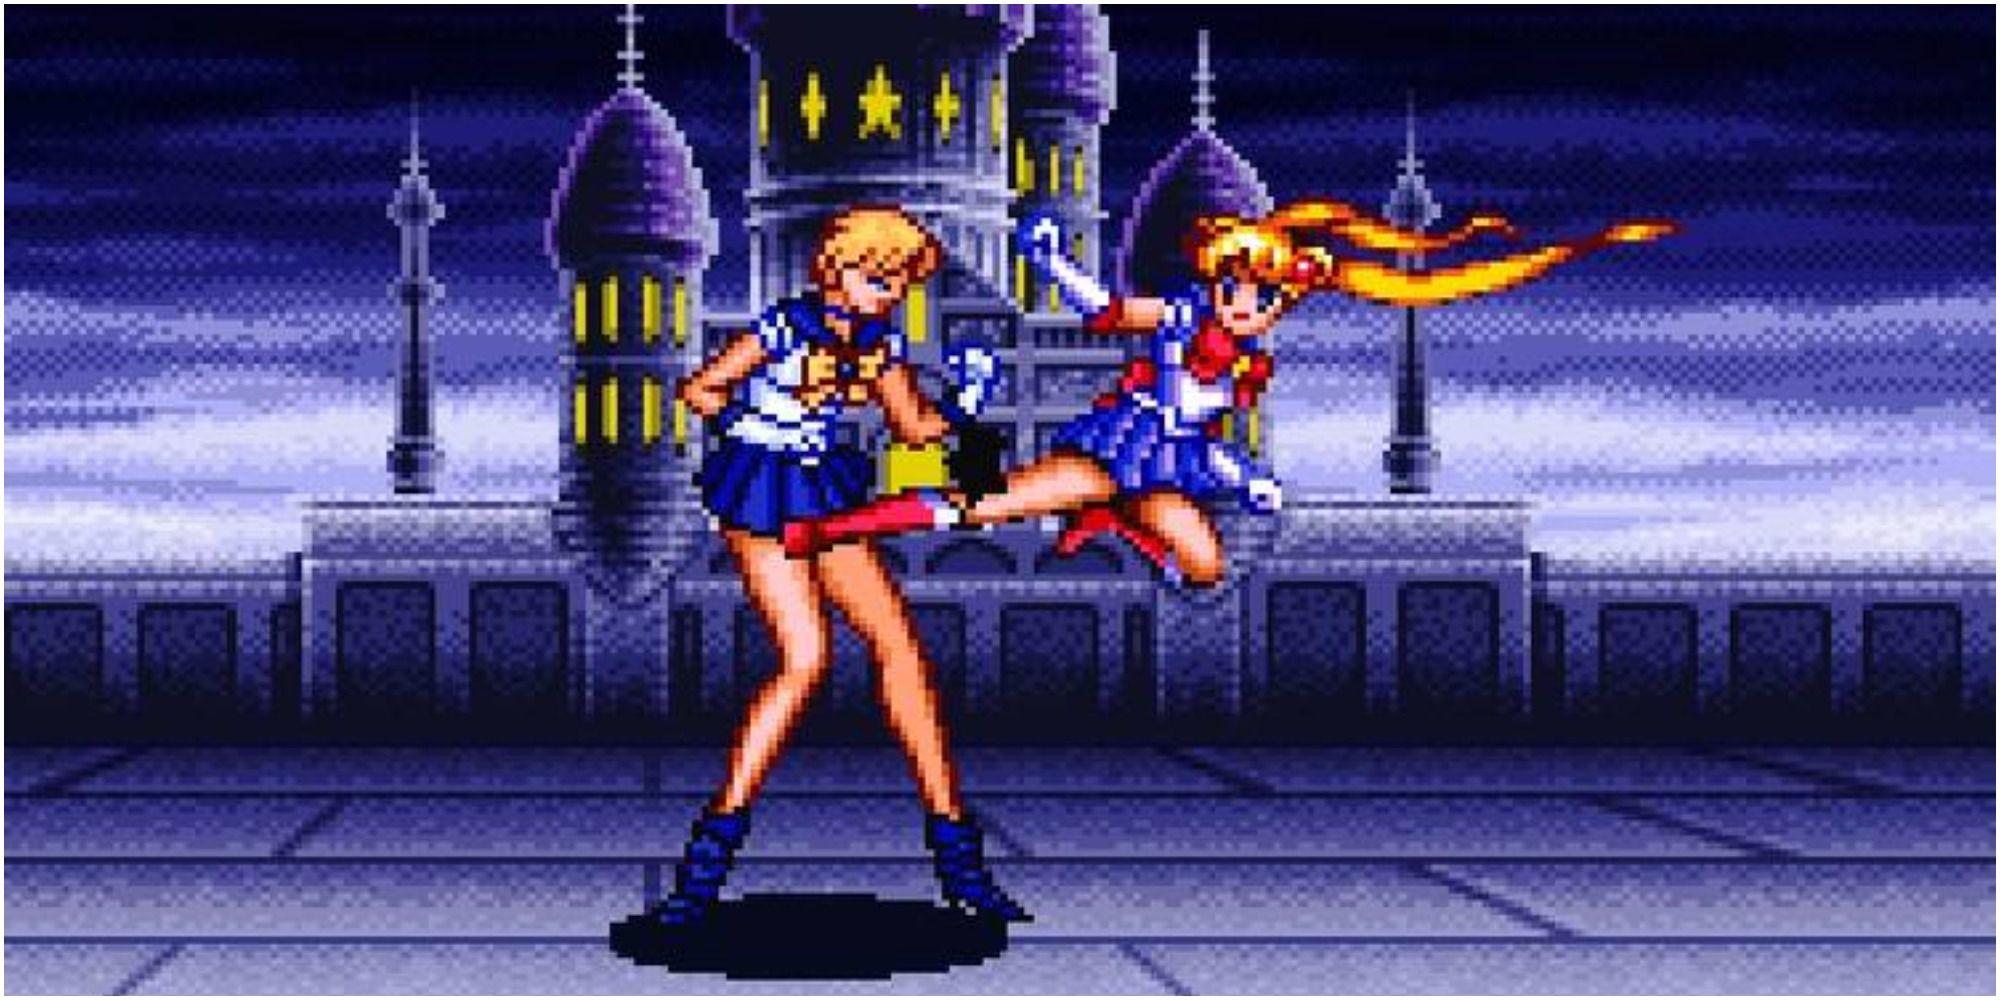 sailor moon s snes character on left getting kicked by character on right